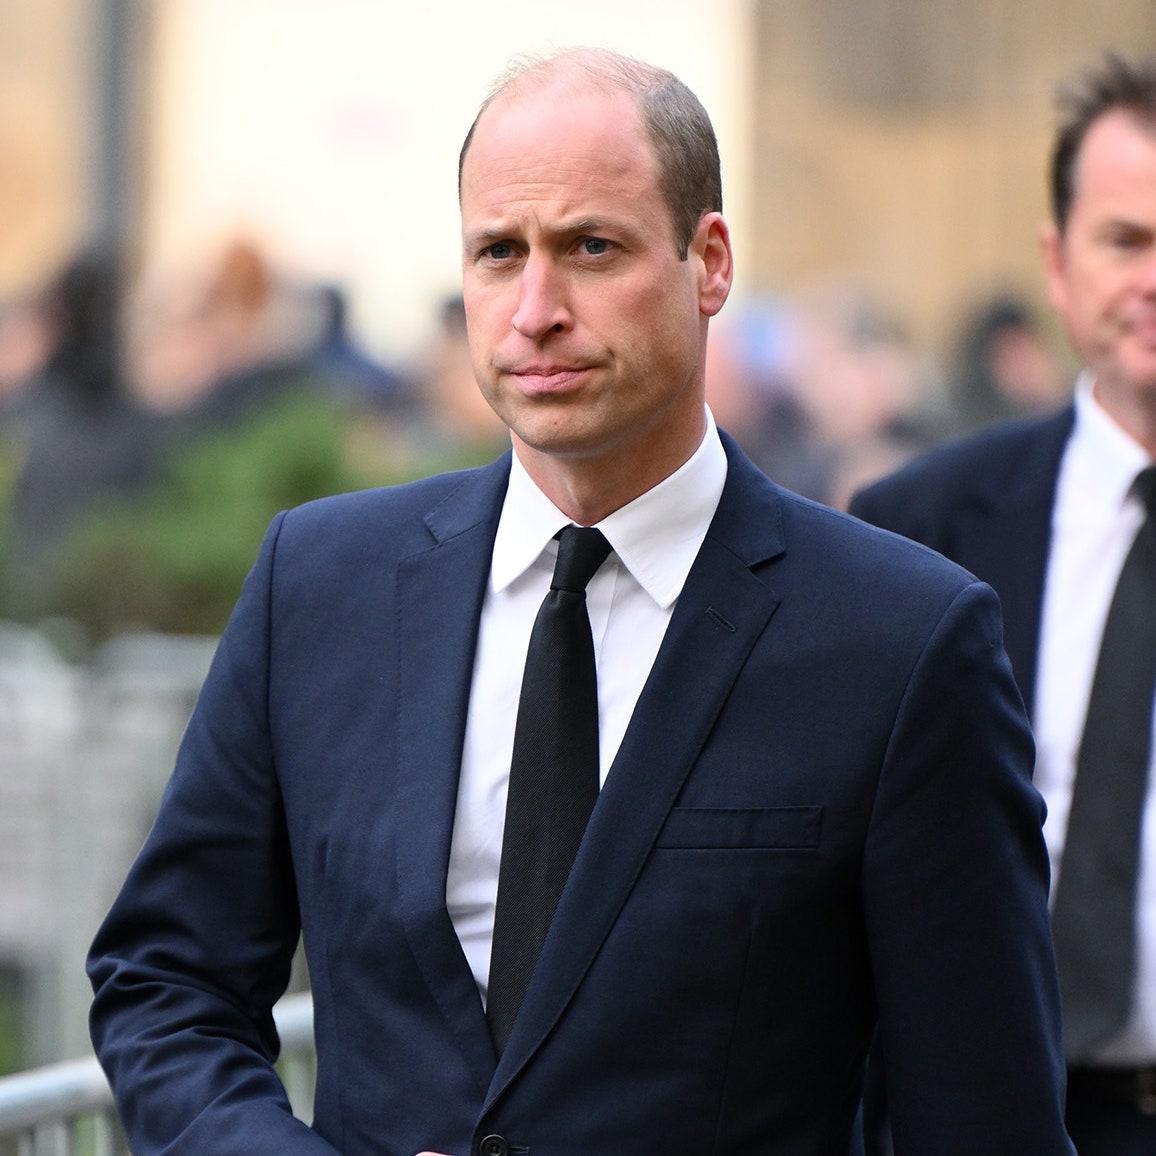 Prince William Pulls Out of Memorial Service Due to “Personal Matter”